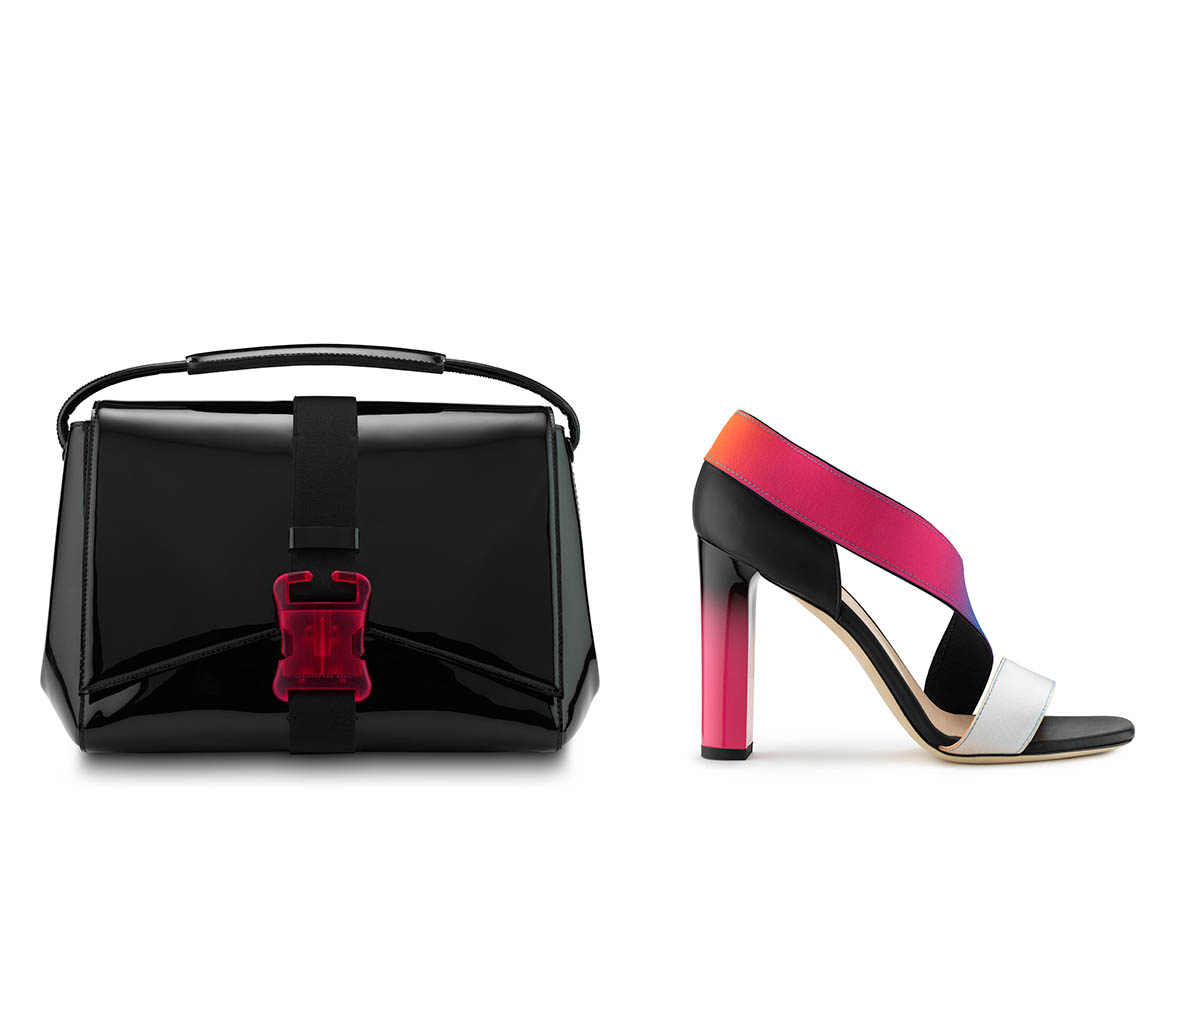 Fashion Photography of Christopher Kane handbag and sandals by Packshot Factory